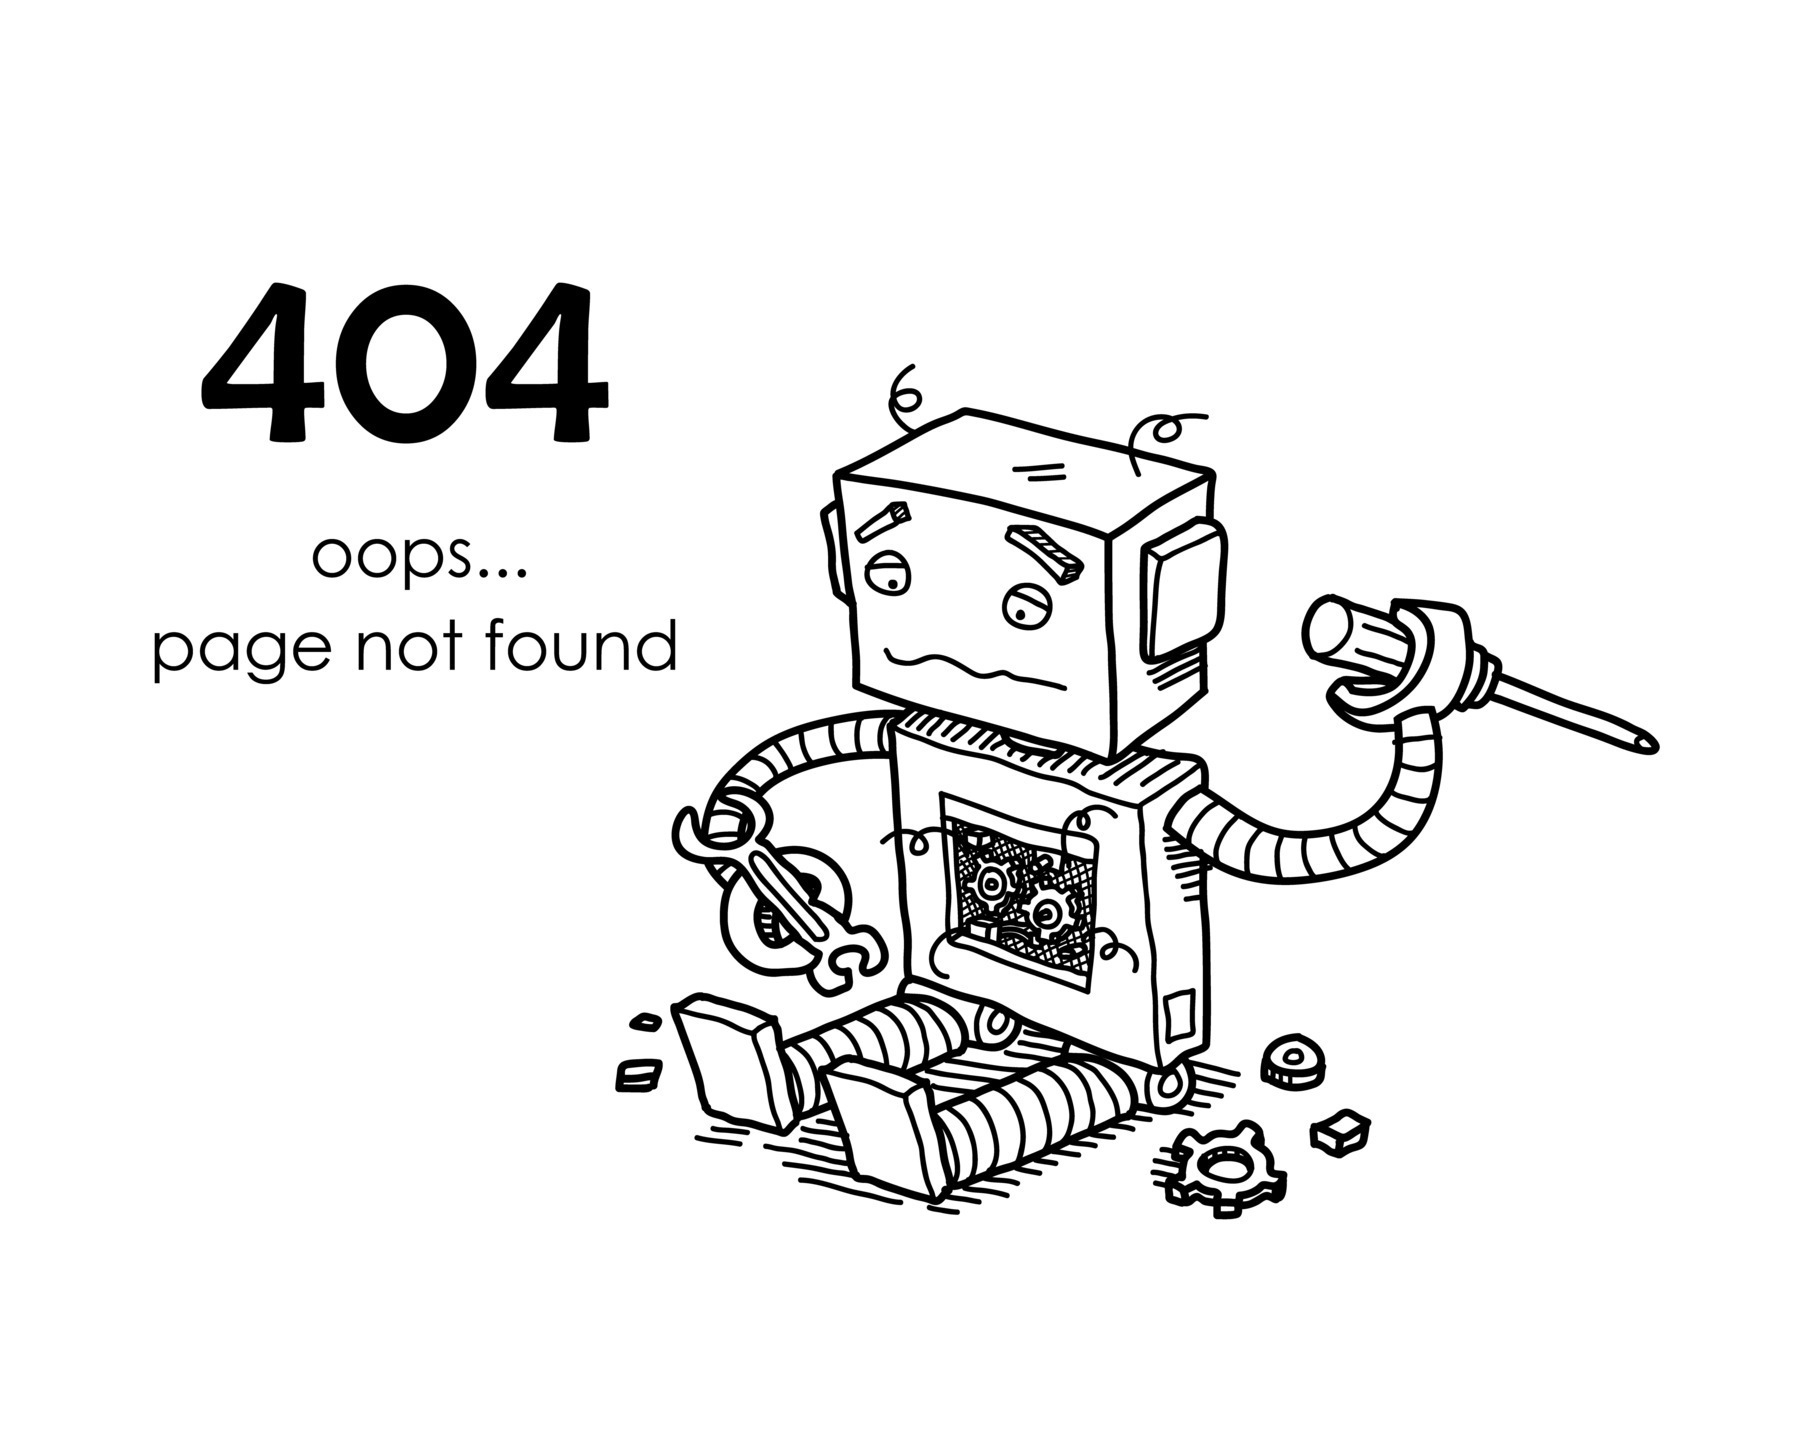 a cartoon image of a robot on a 404 error web page